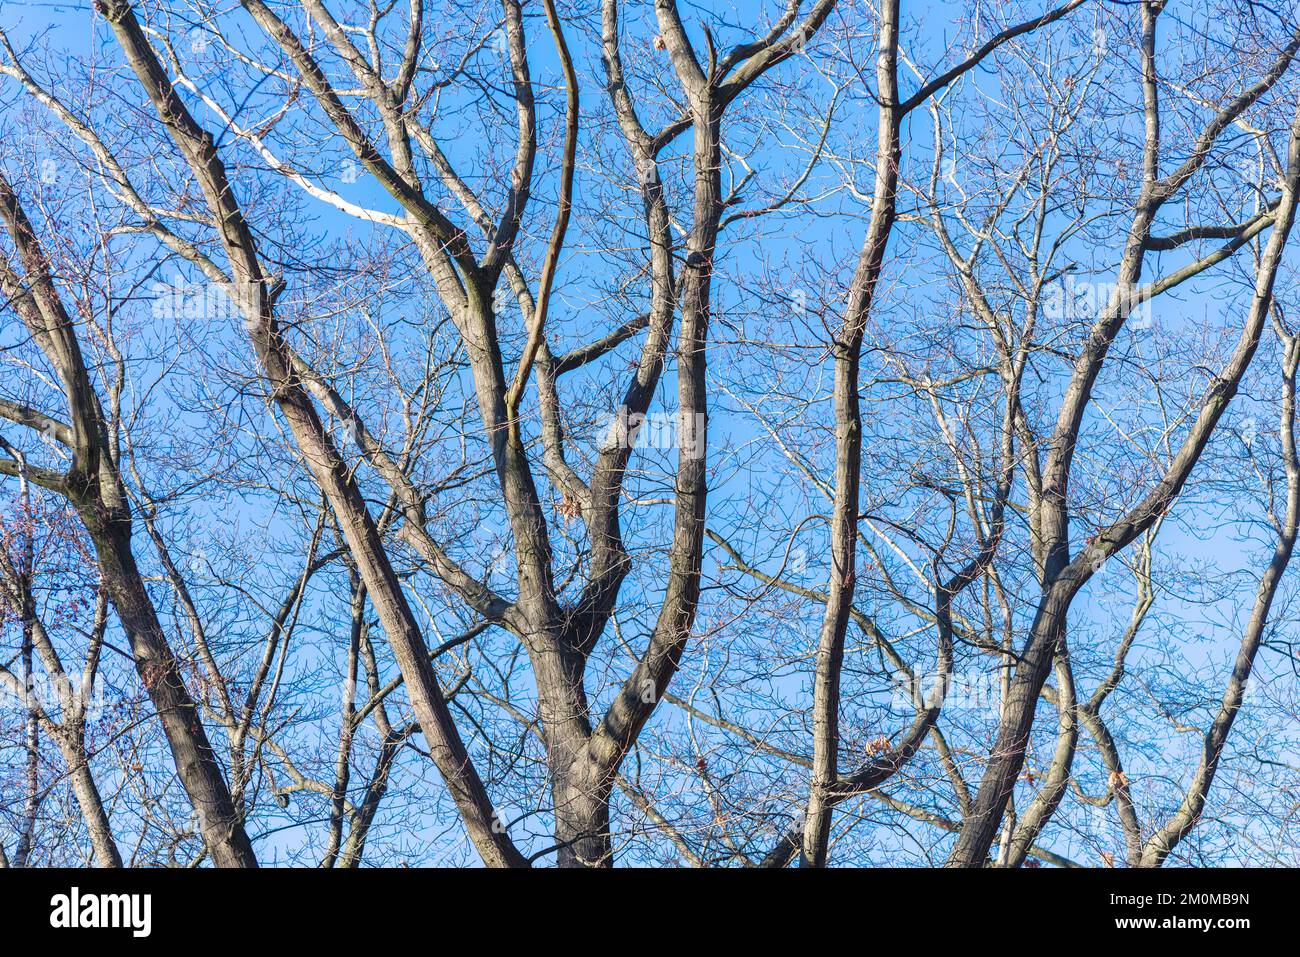 tree branches belonging to a large tree against a blue sky Stock Photo